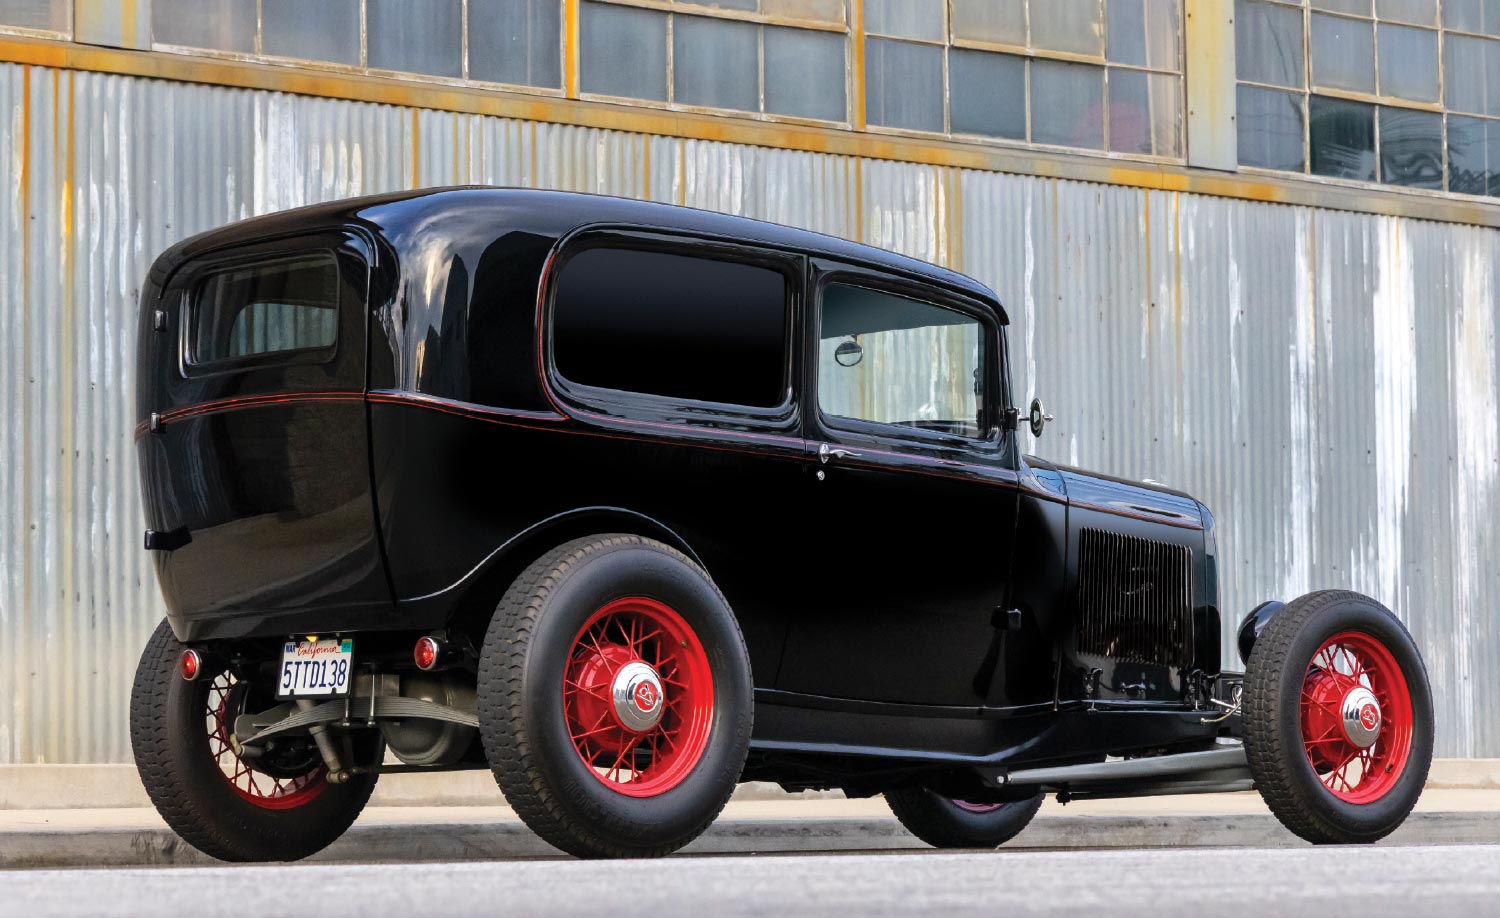 32' Ford highboy's rear side view